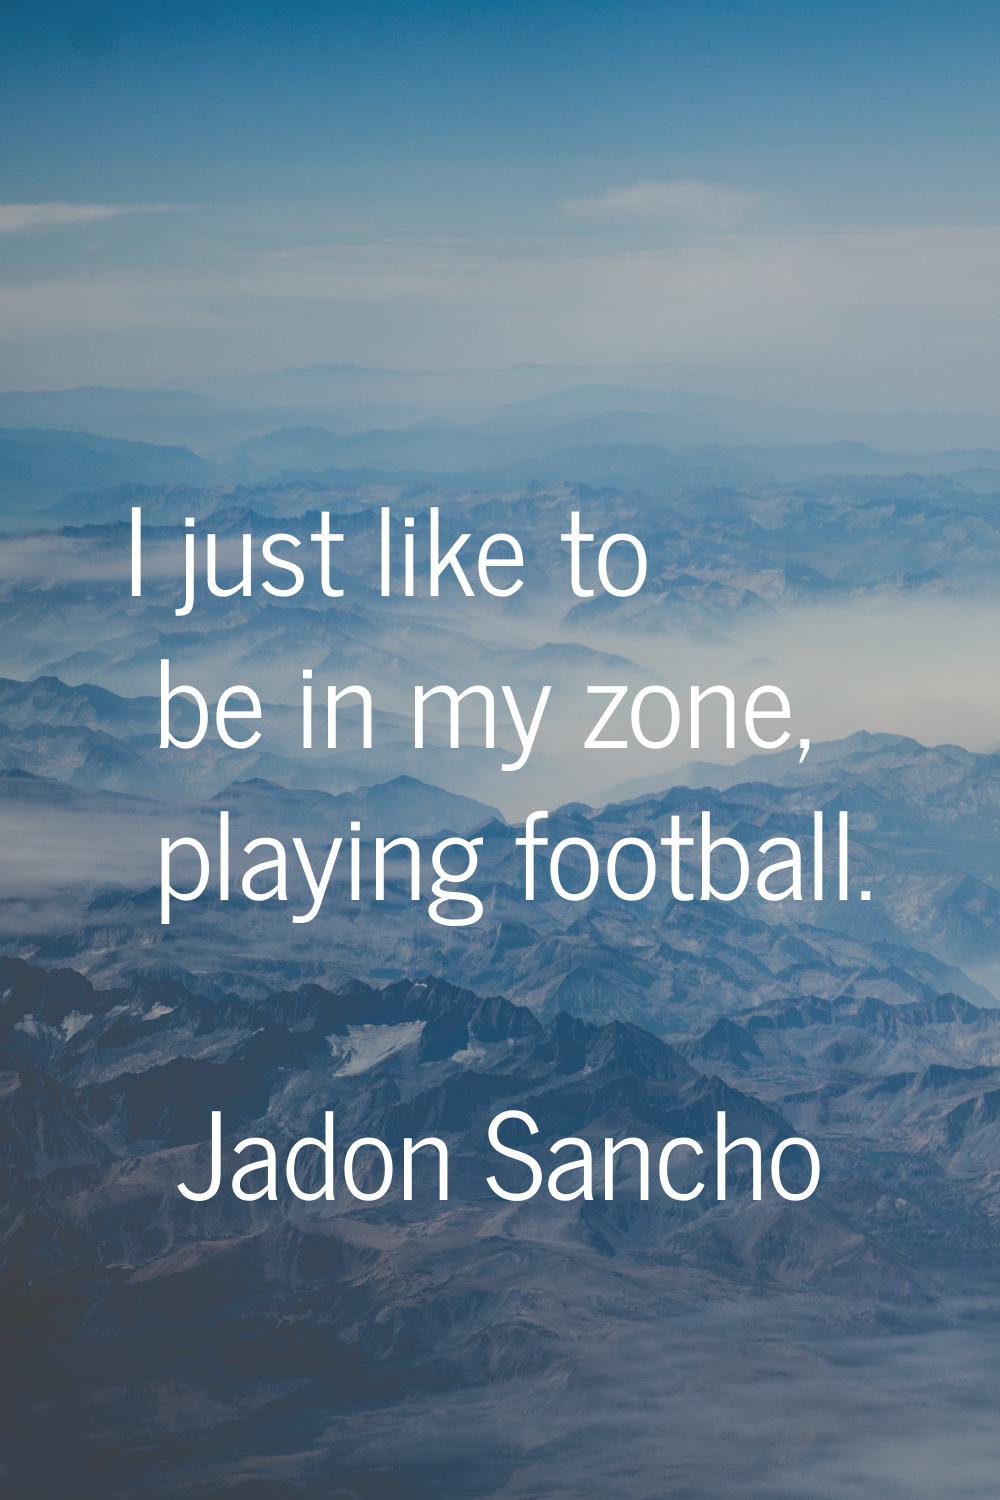 I just like to be in my zone, playing football.